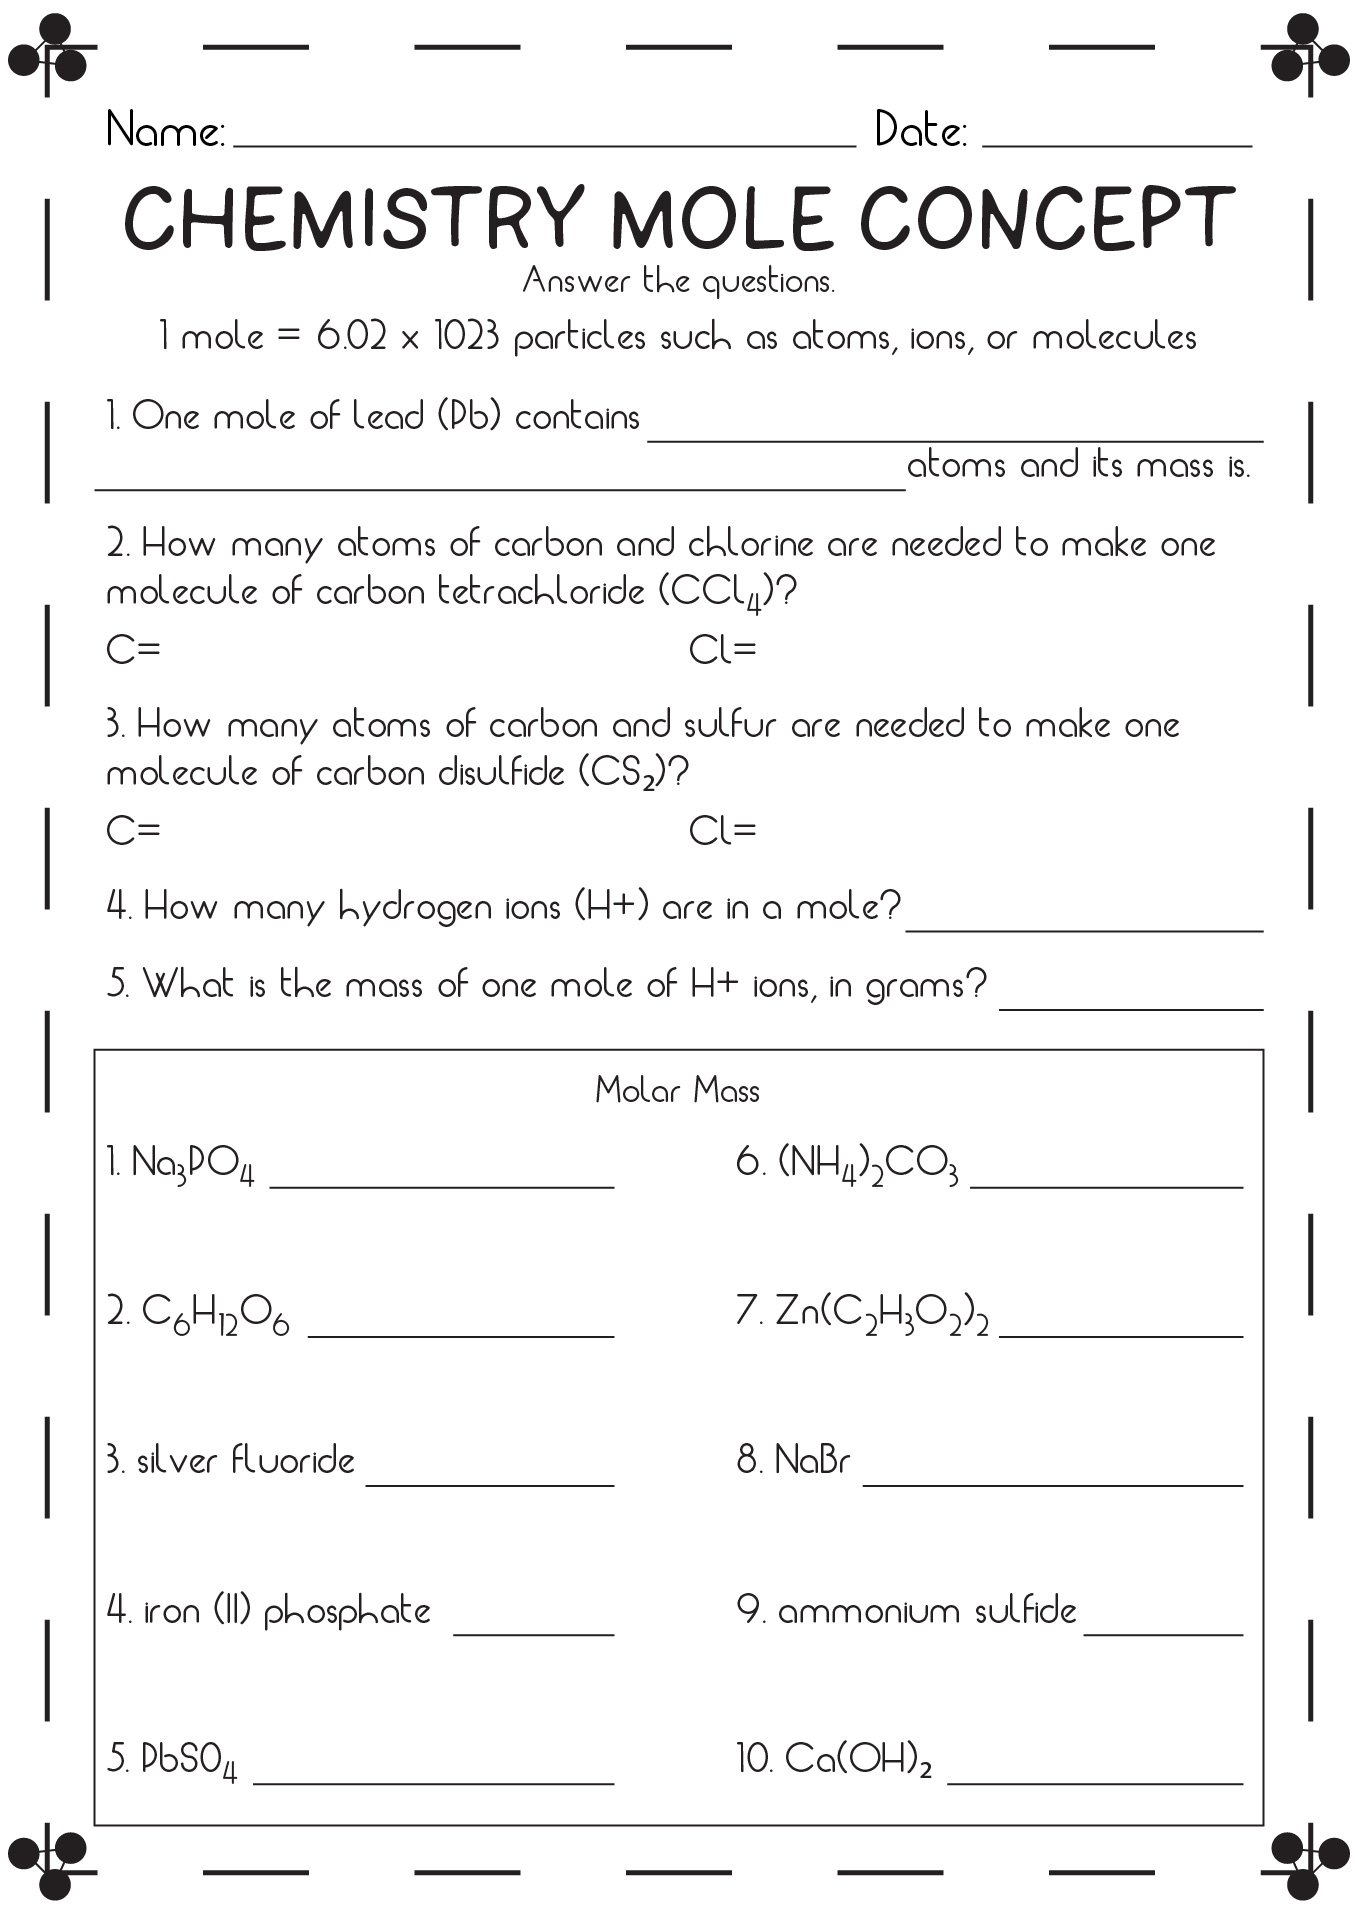 Chemistry Mole Concept Worksheet Answers